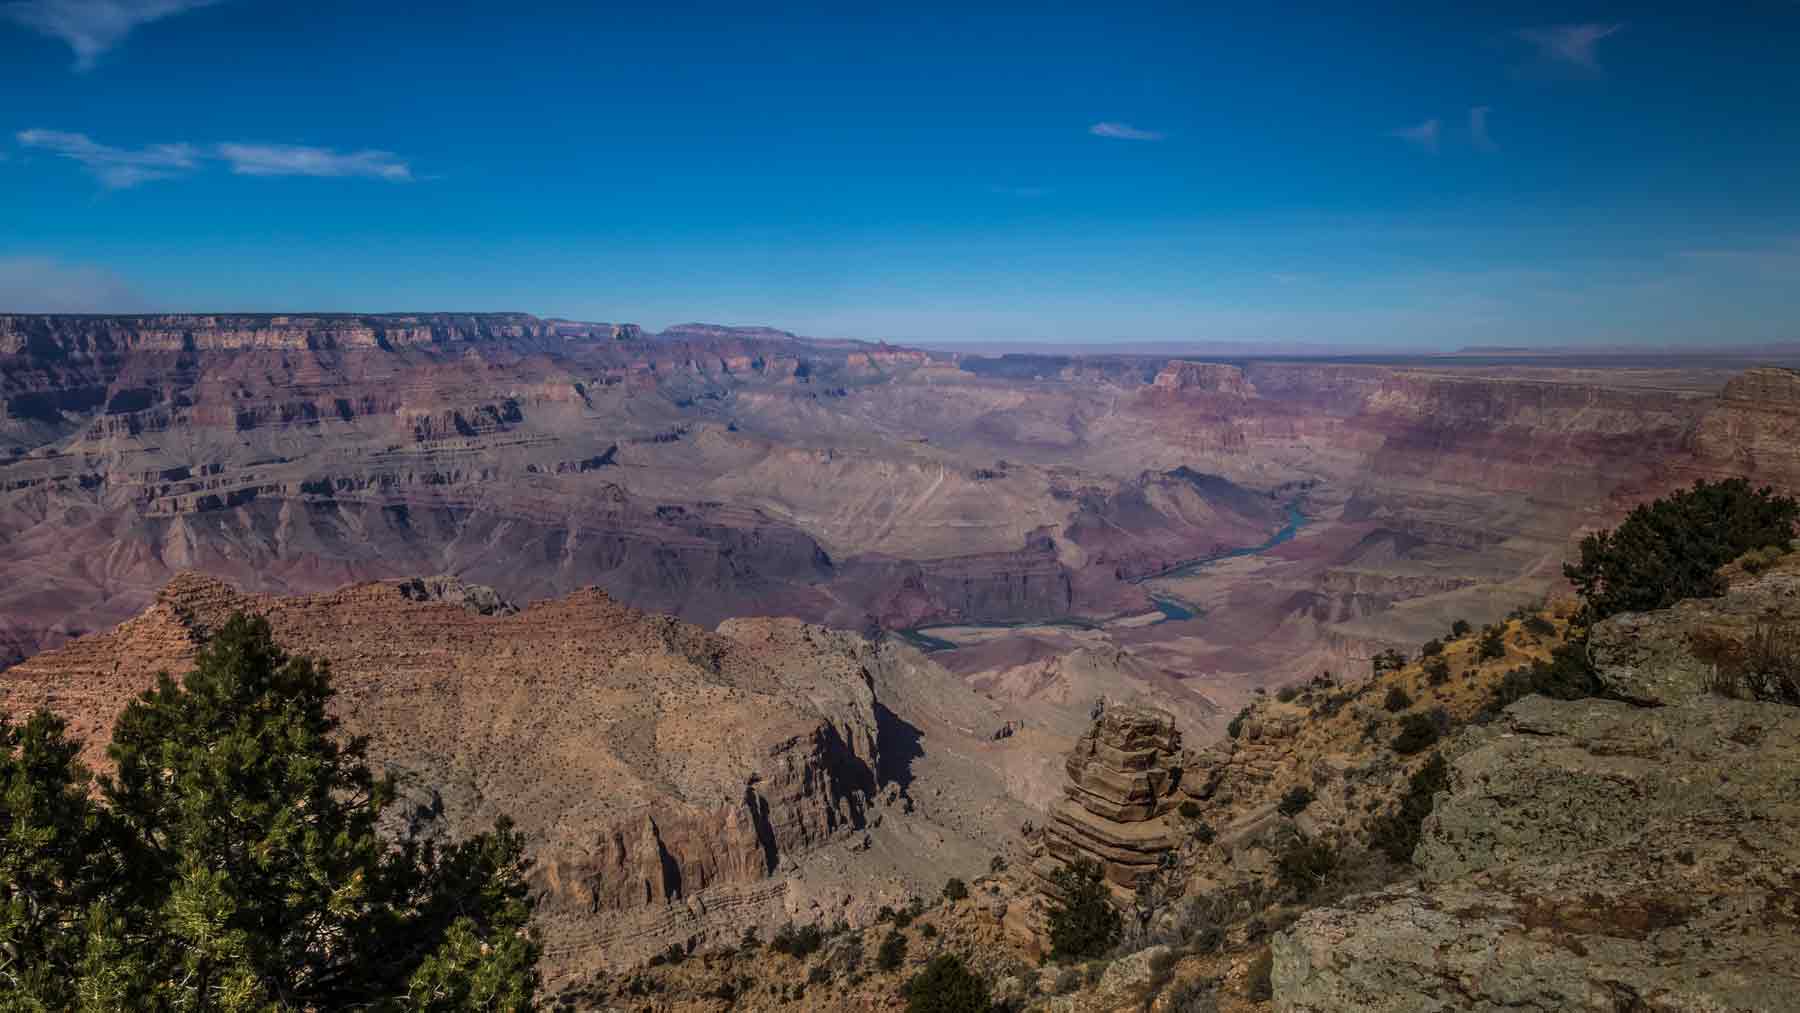 Bright blue sky over the Grand Canyon with the Colorado River visible below